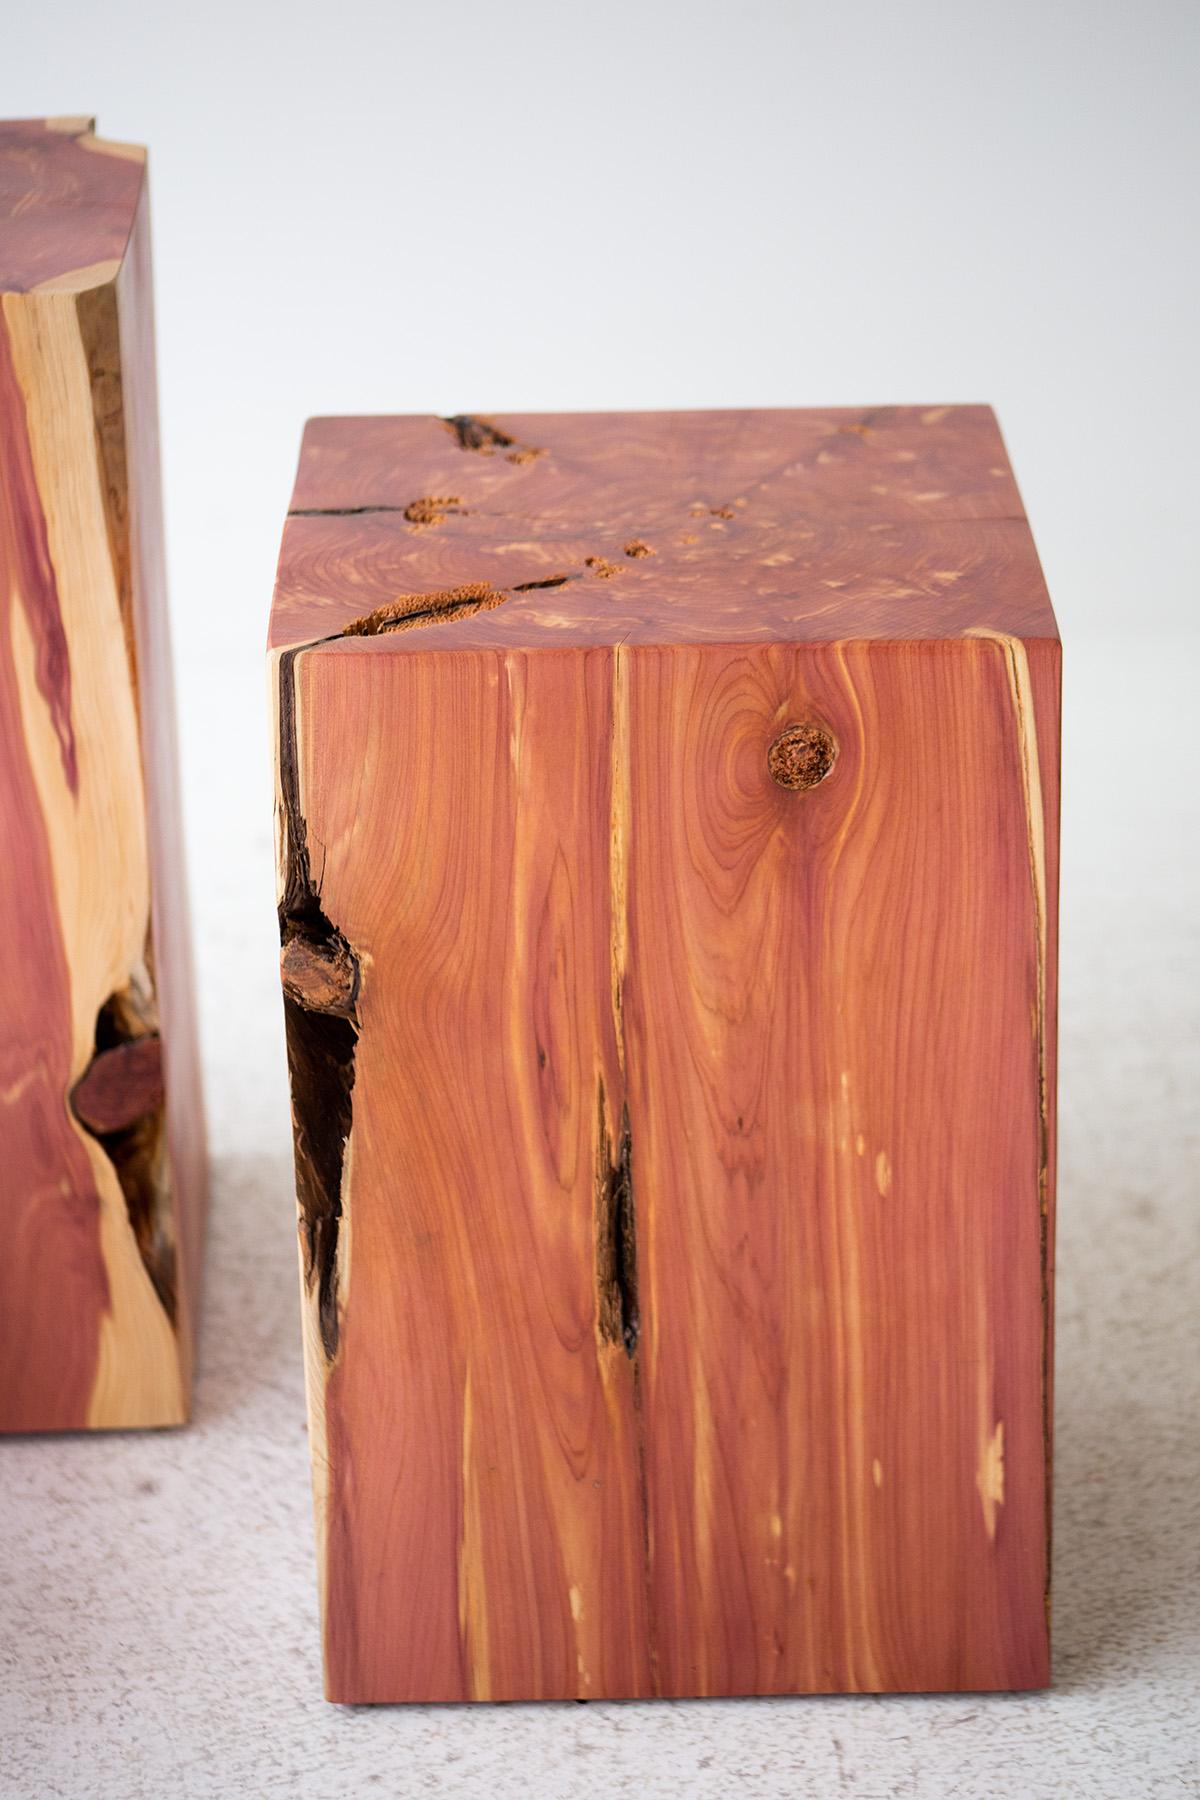 Contemporary Bertu Wood Side Tables, Red Cedar Outdoor Wood Side Tables For Sale